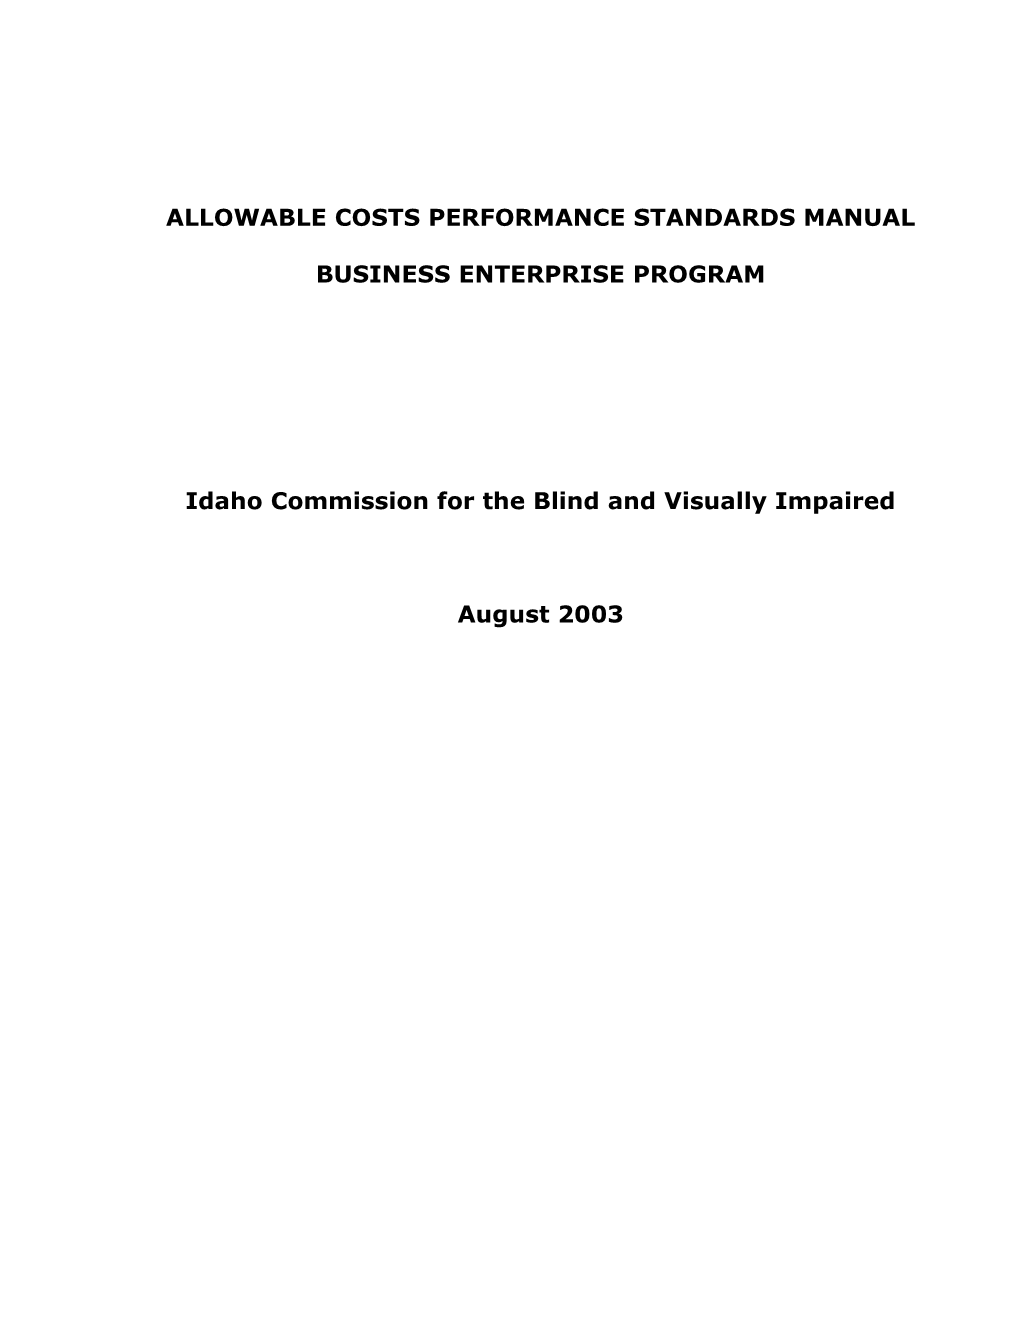 Allowable Costs Performance Standards